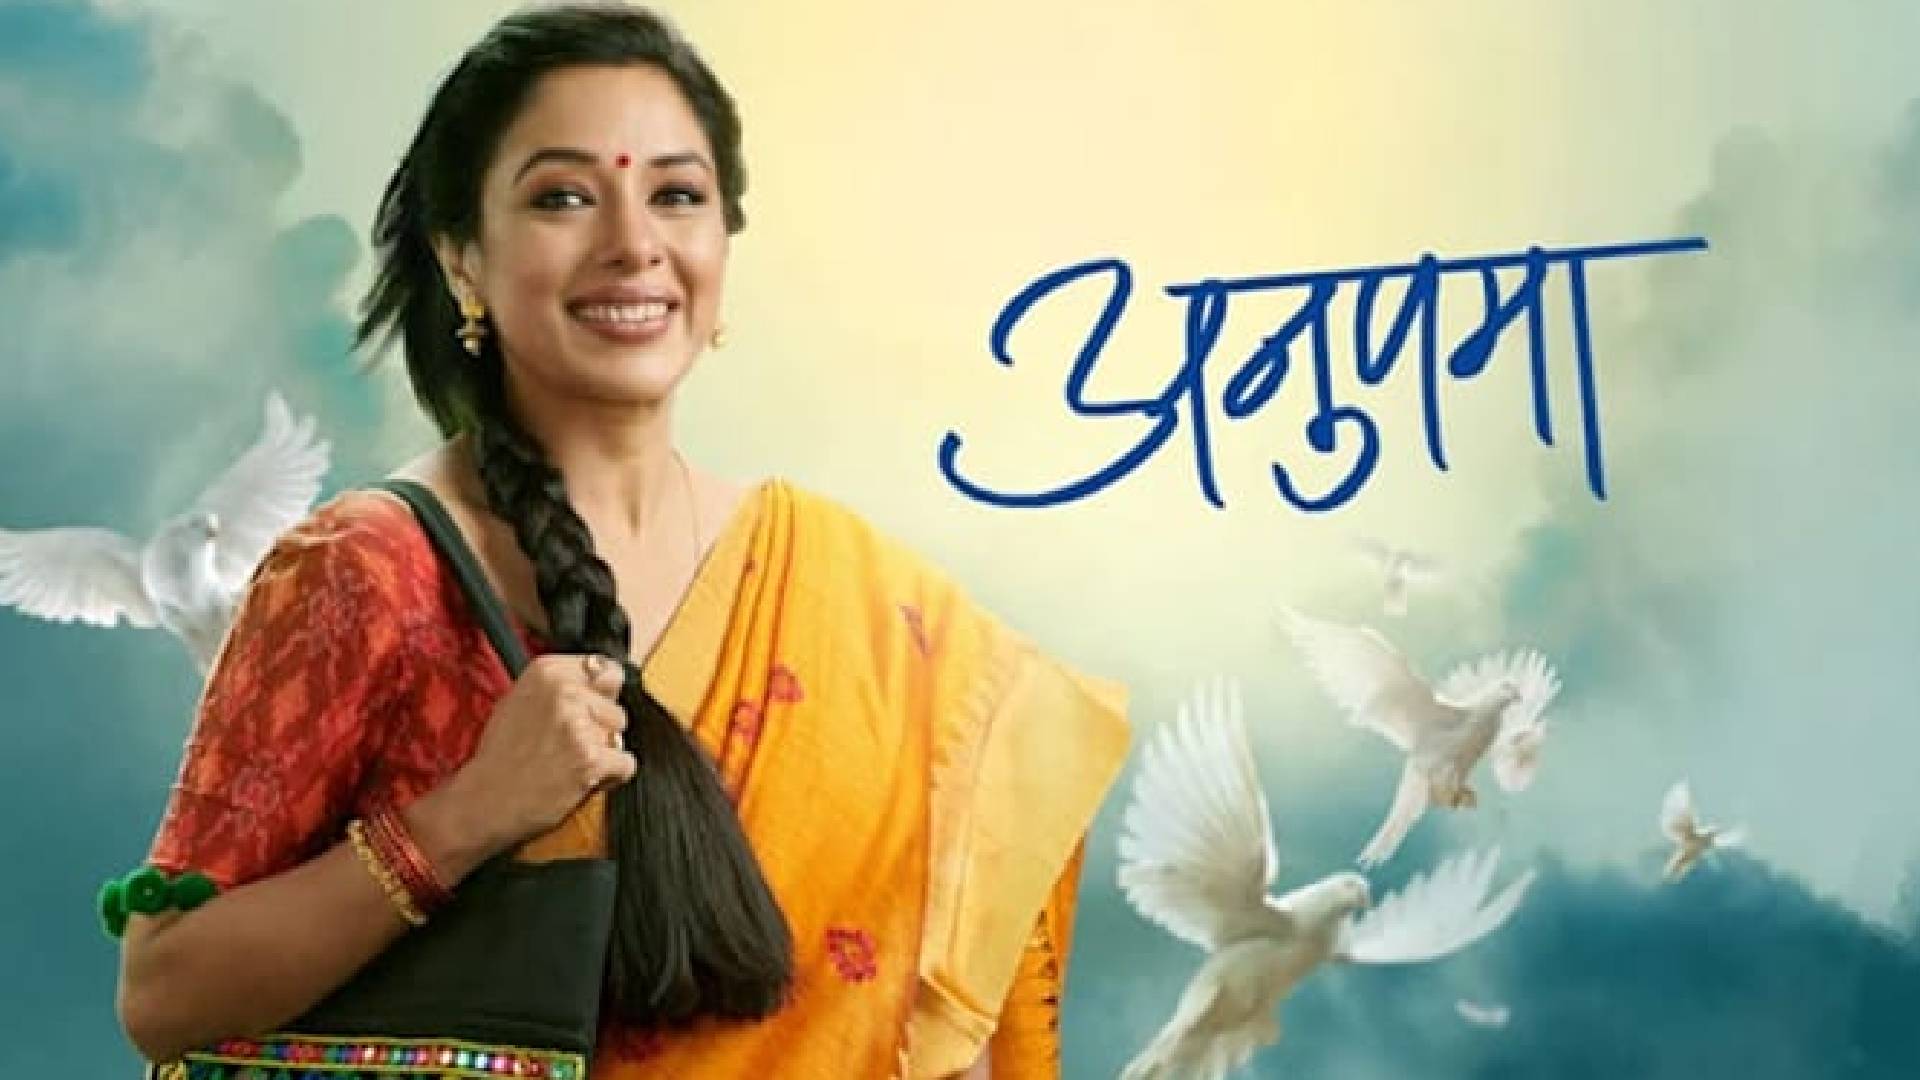 “The show Anupama is a tribute to all Gujaratis,” shares Rupali Ganguly, aka Anupama, from the Star Plus show Anupama!